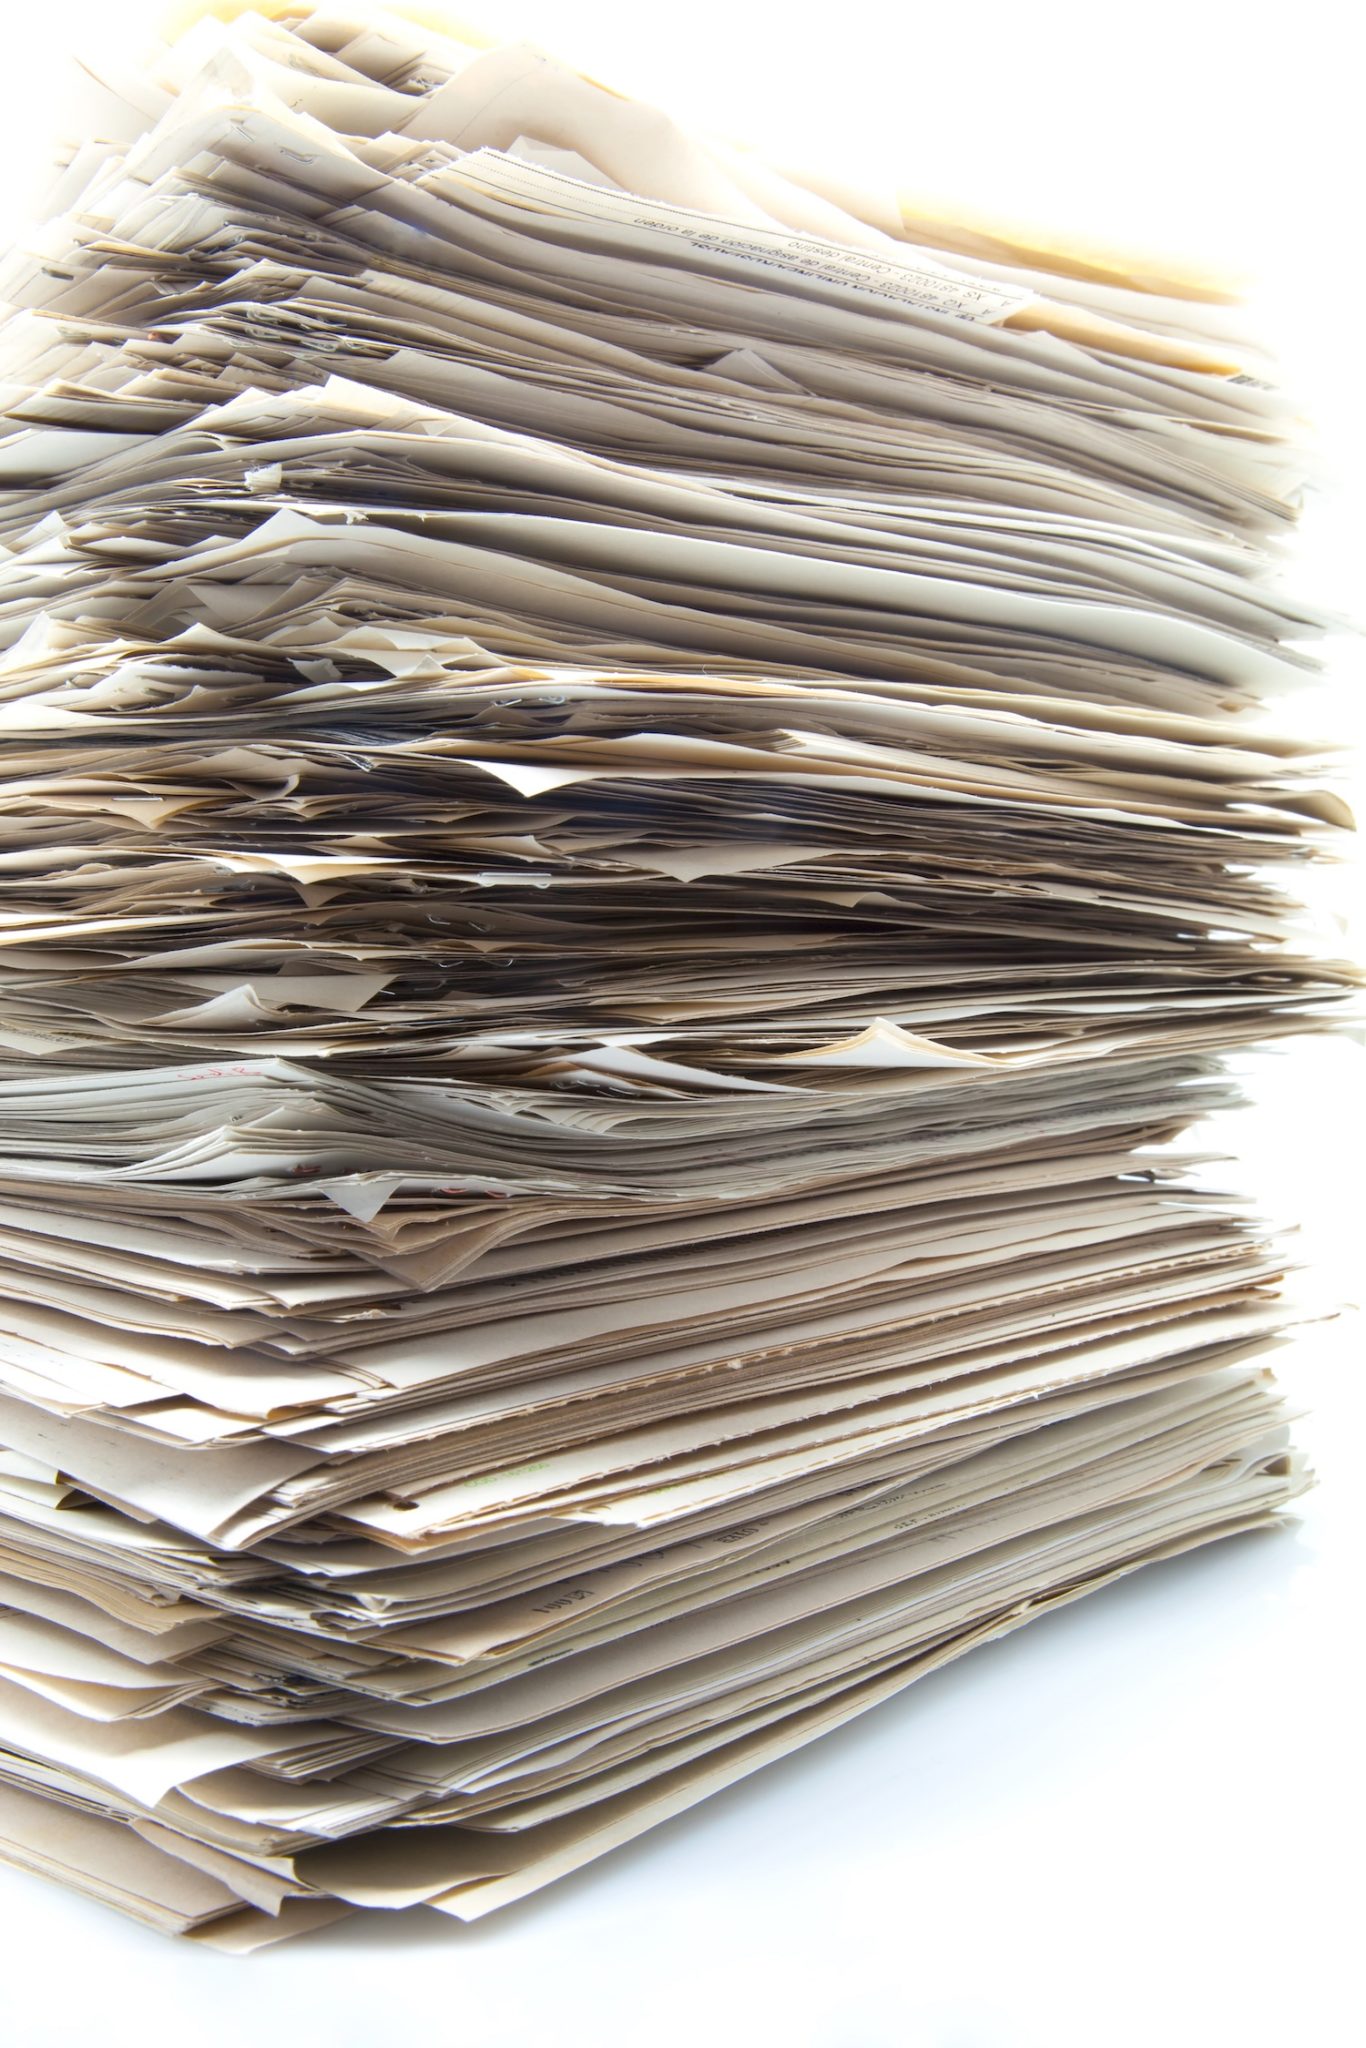 Paper Charts To Electronic Medical Records